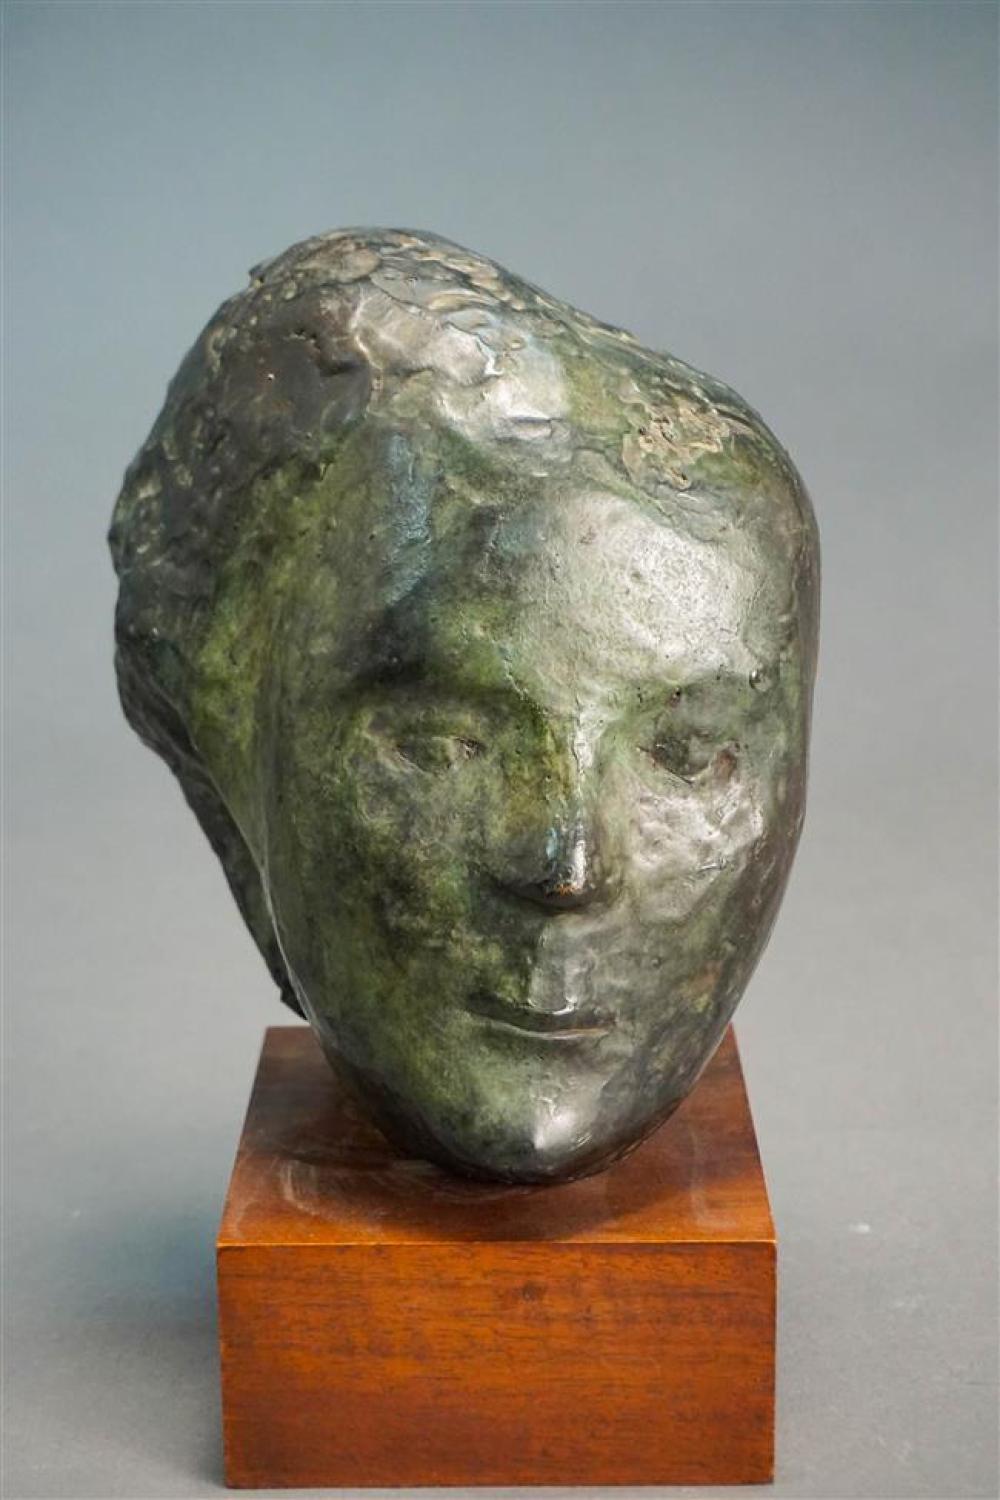 BRONZE BUST OF A WOMAN ON WOOD 32596d